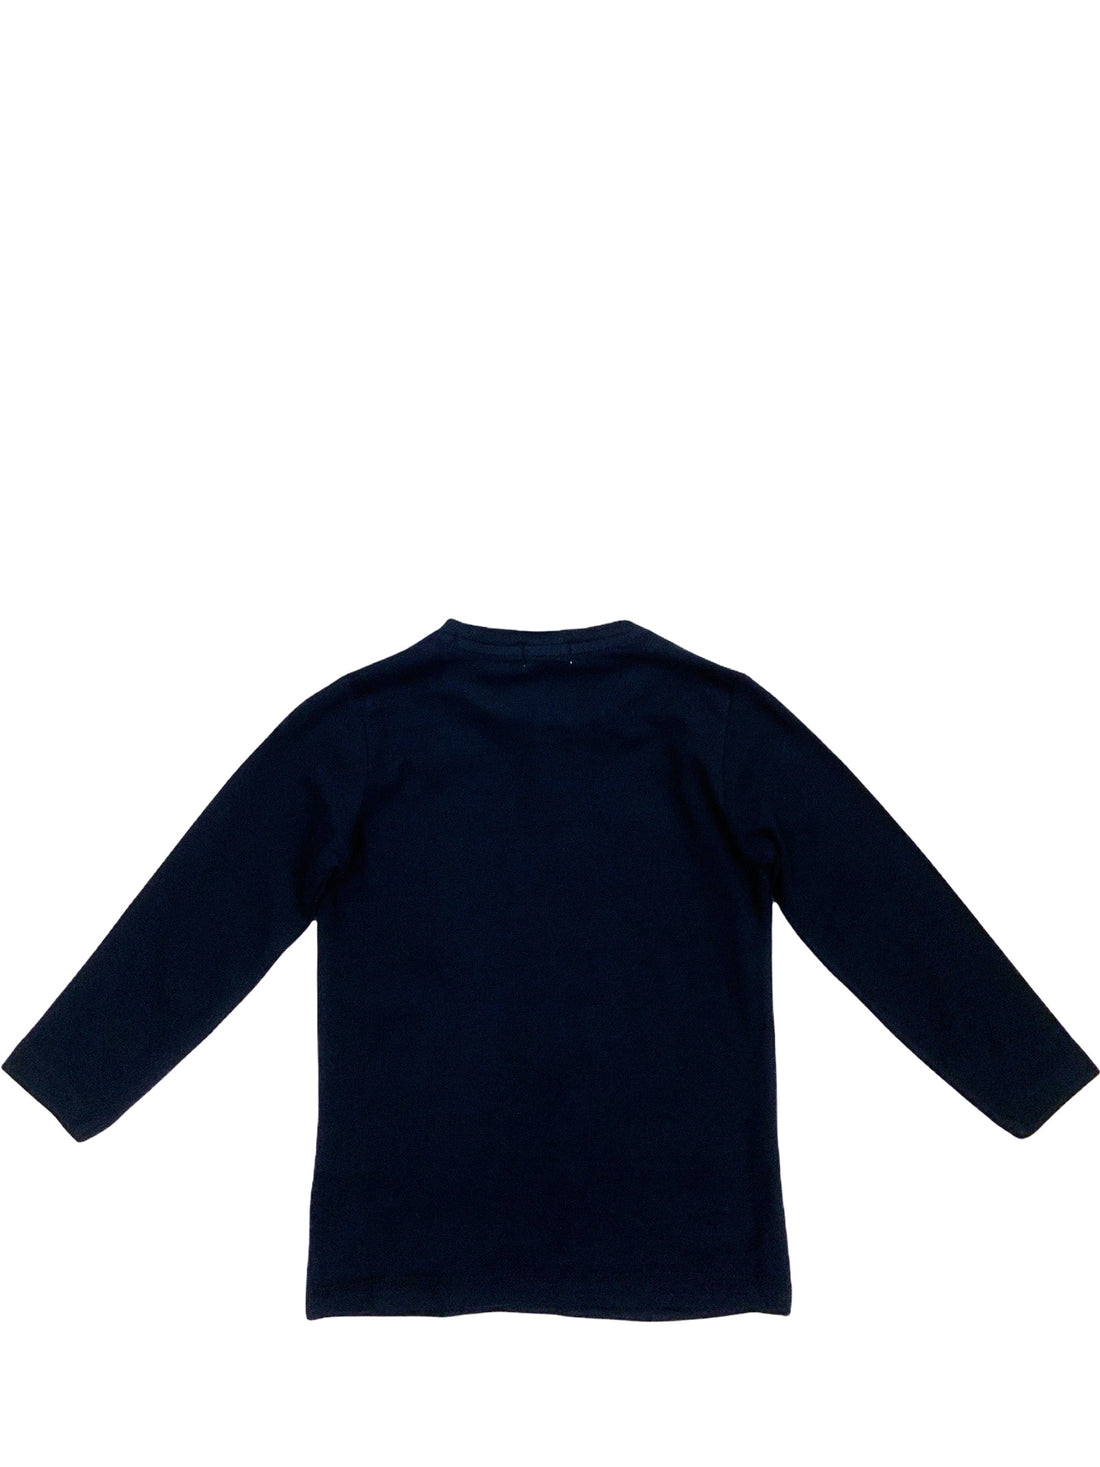 Maglie Blu Scuro Melby